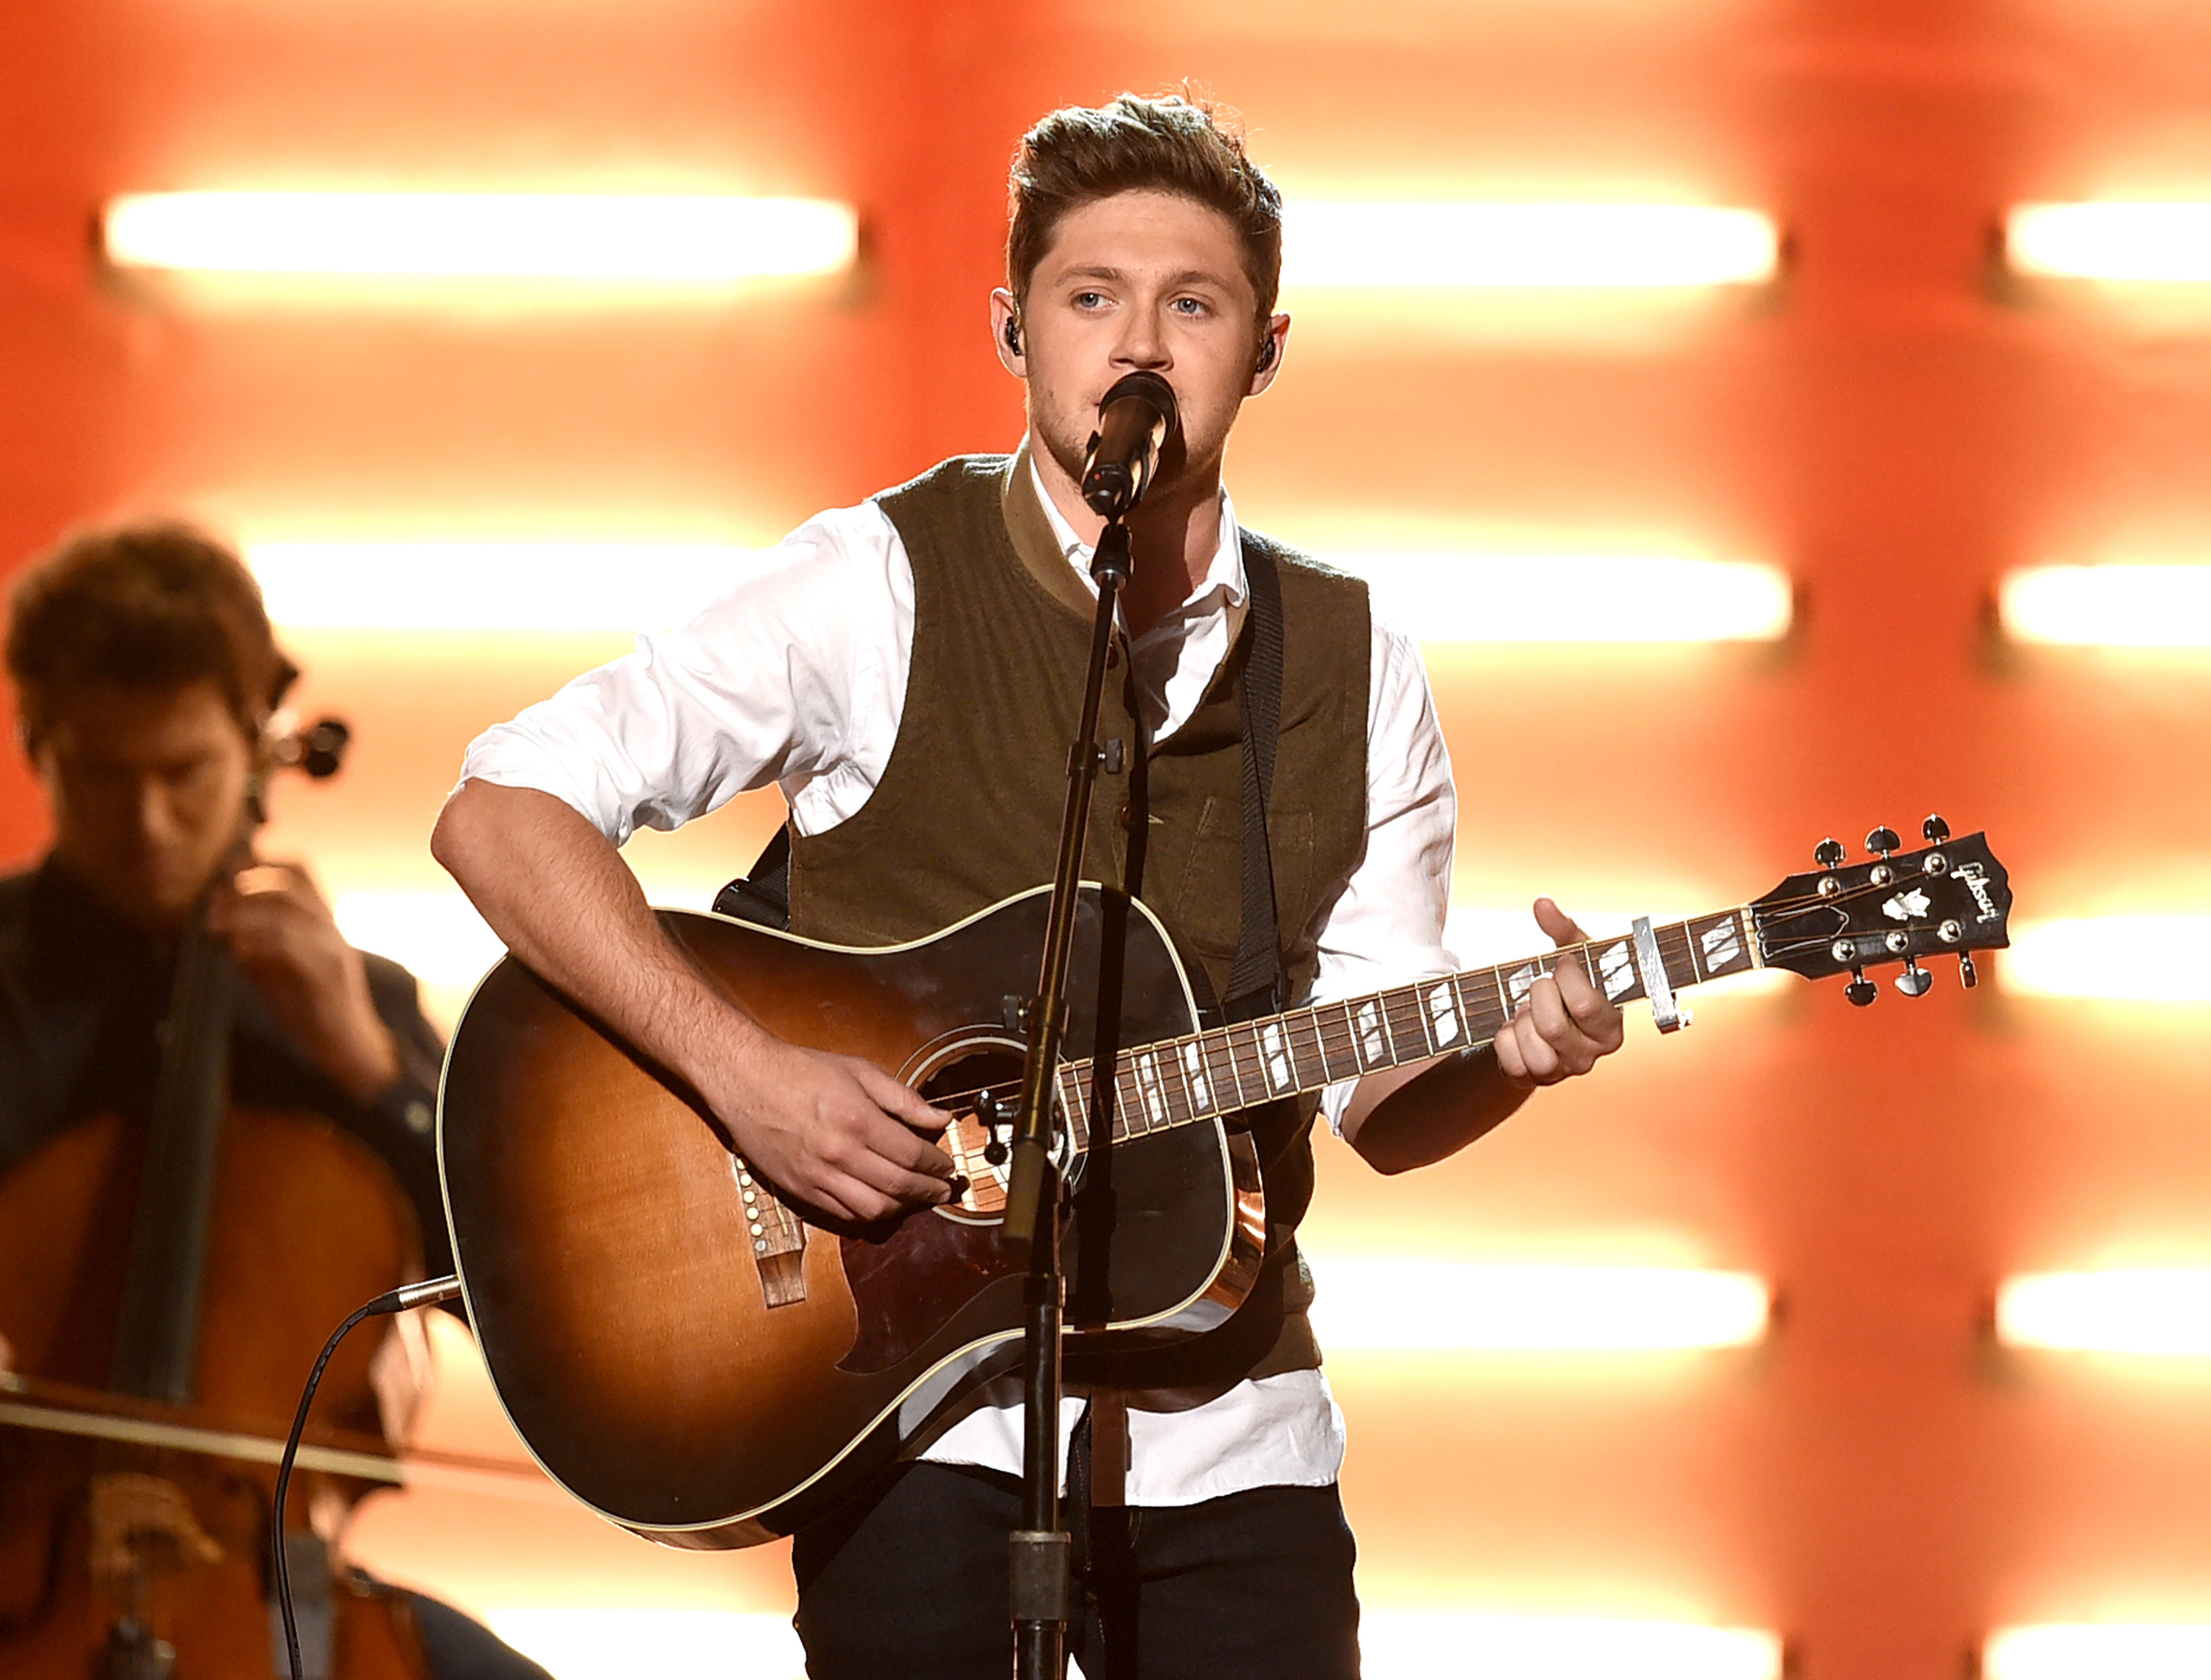 LOS ANGELES, CA - NOVEMBER 20: Singer Niall Horan performs onstage during the 2016 American Music Awards at Microsoft Theater on November 20, 2016 in Los Angeles, California. Kevin Winter/Getty Images/AFP